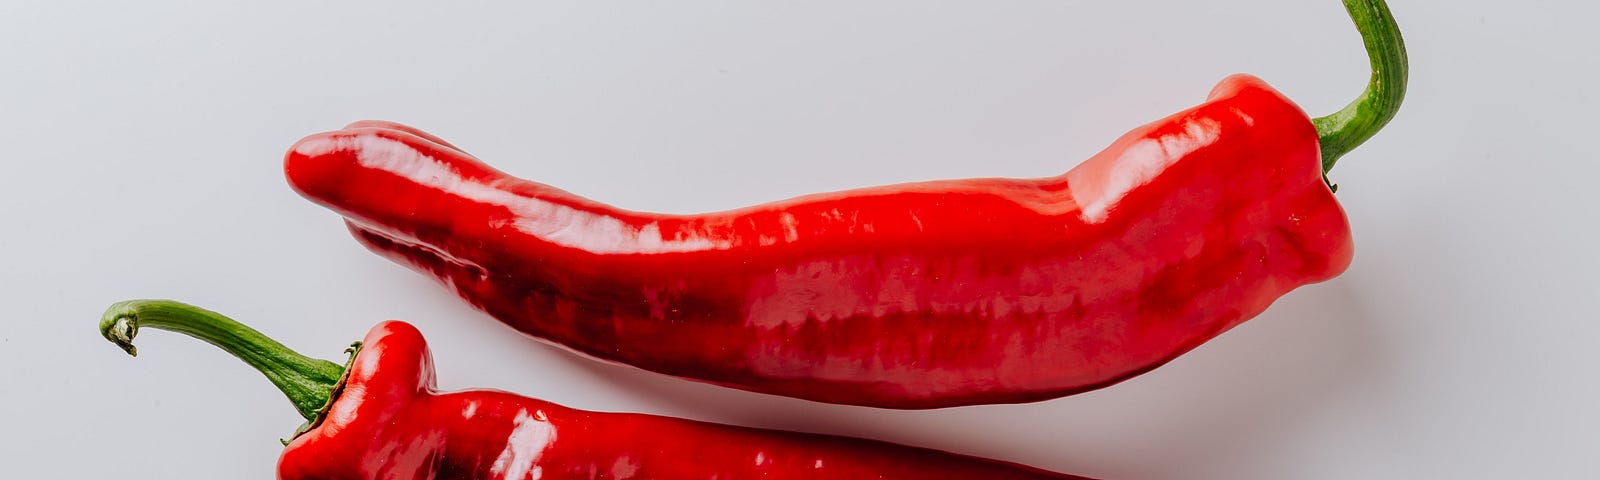 Red chillis on white background